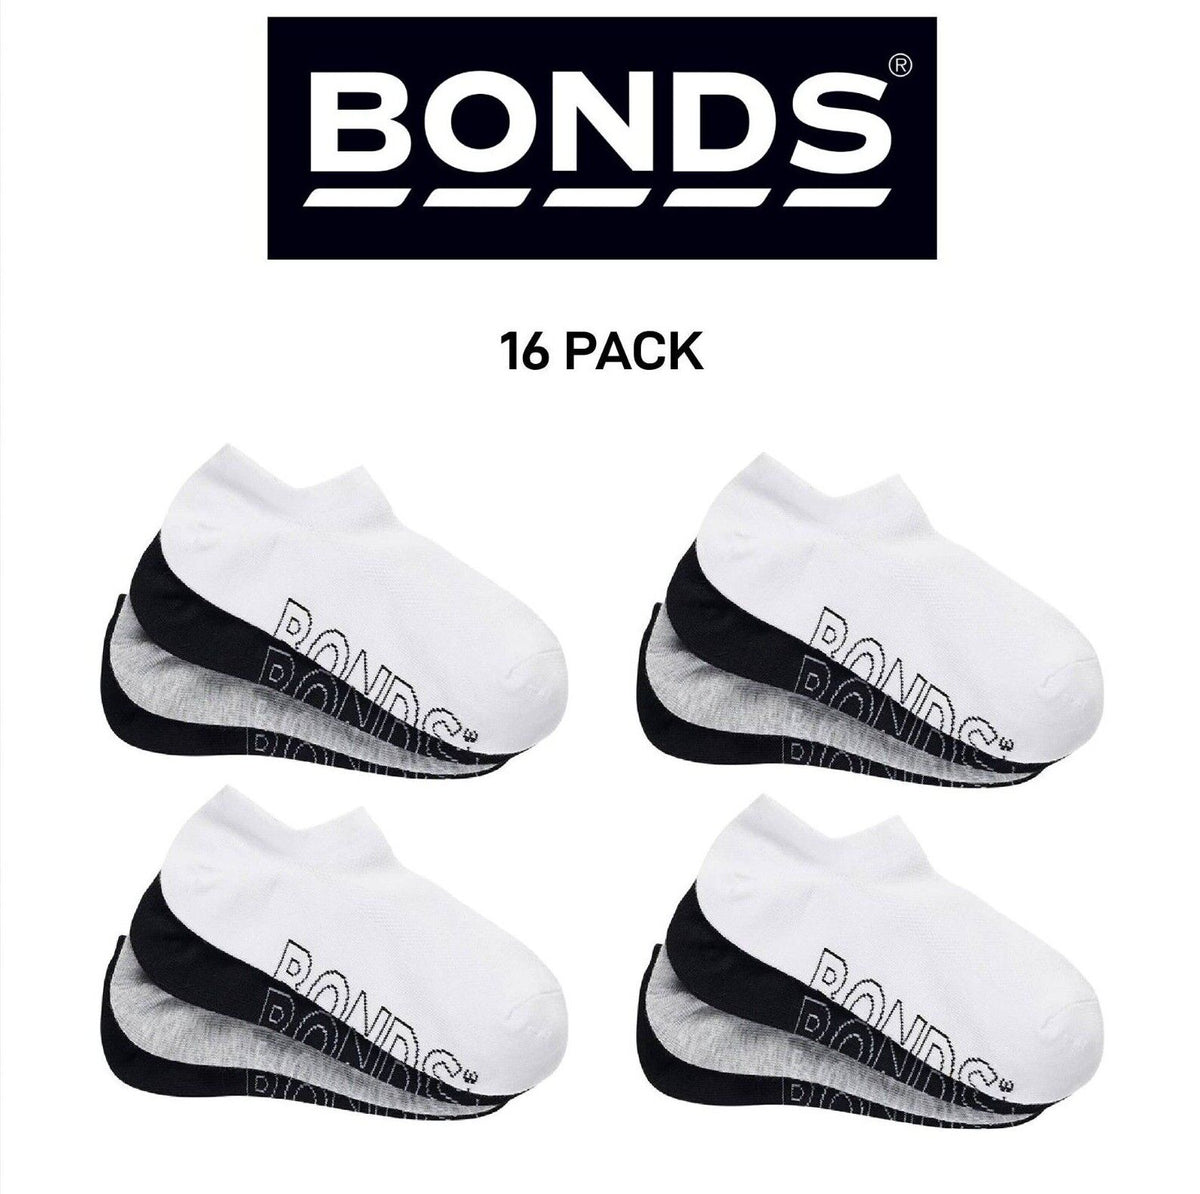 Bonds Womens Lightweight No Show Cotton Mesh Cooling Zone Socks 16 Pack LXPW4N